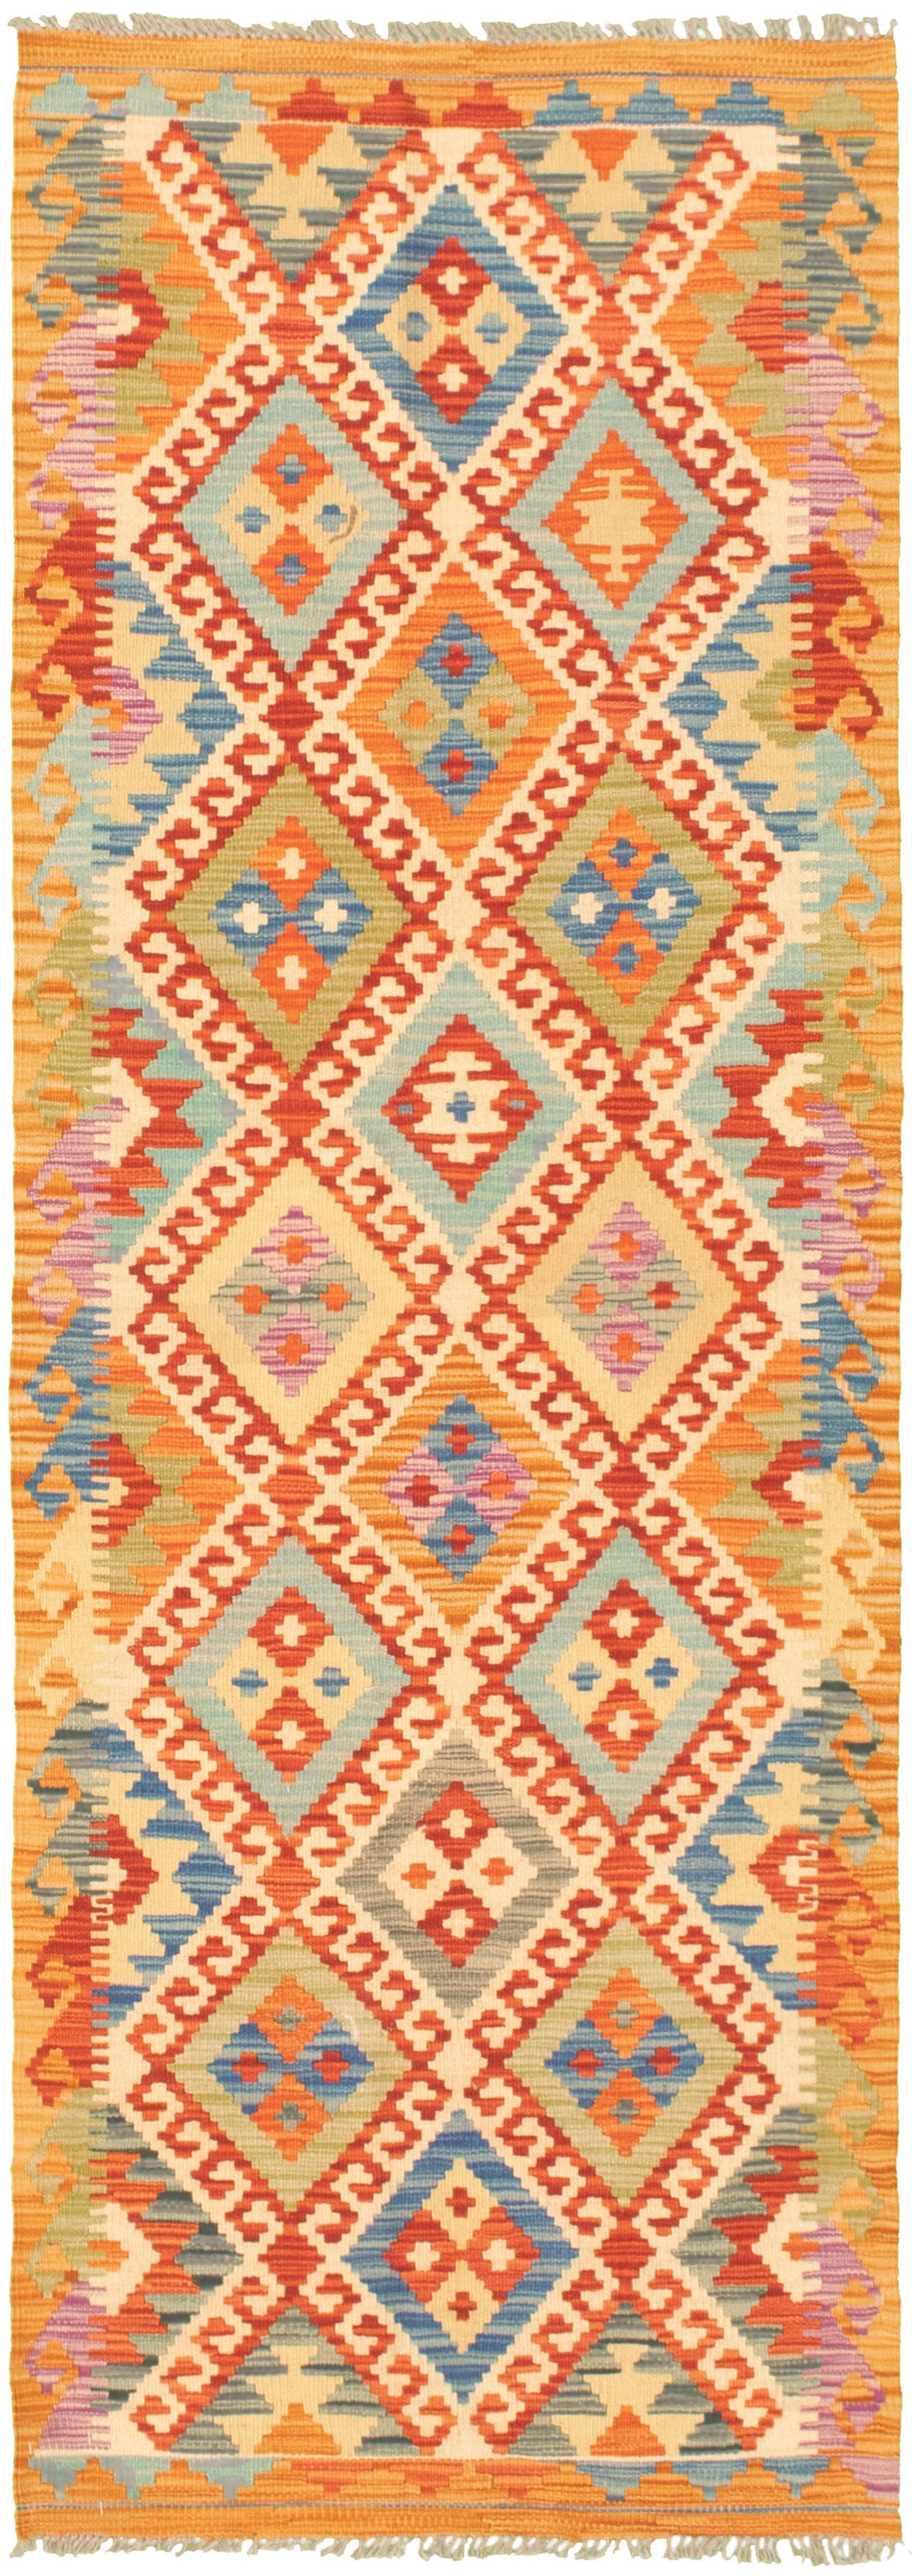 Hand Woven Bold And Colorful Cream Wool Kilim 2